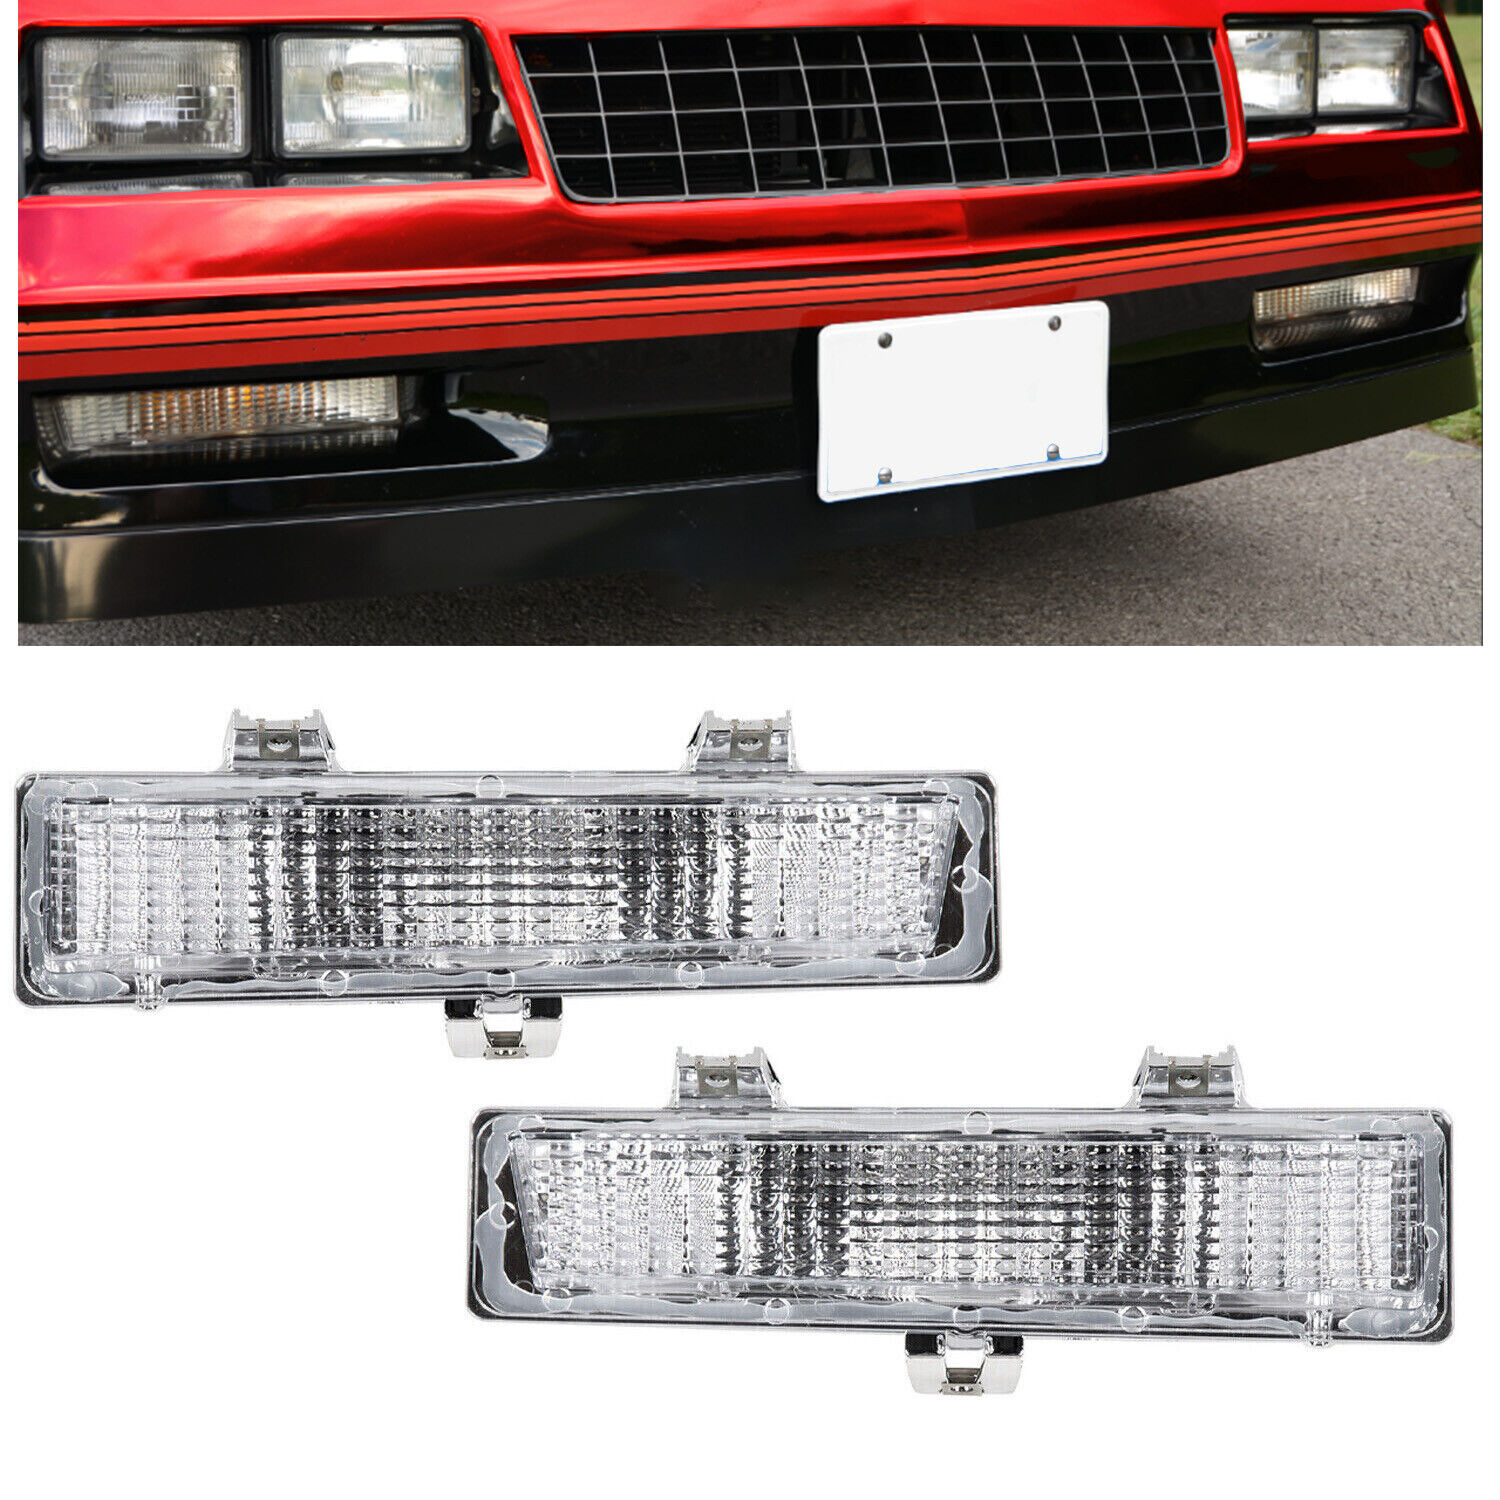 New FITS 1981-1988 Monte Carlo SS Front Park and Turn Signal Light Set